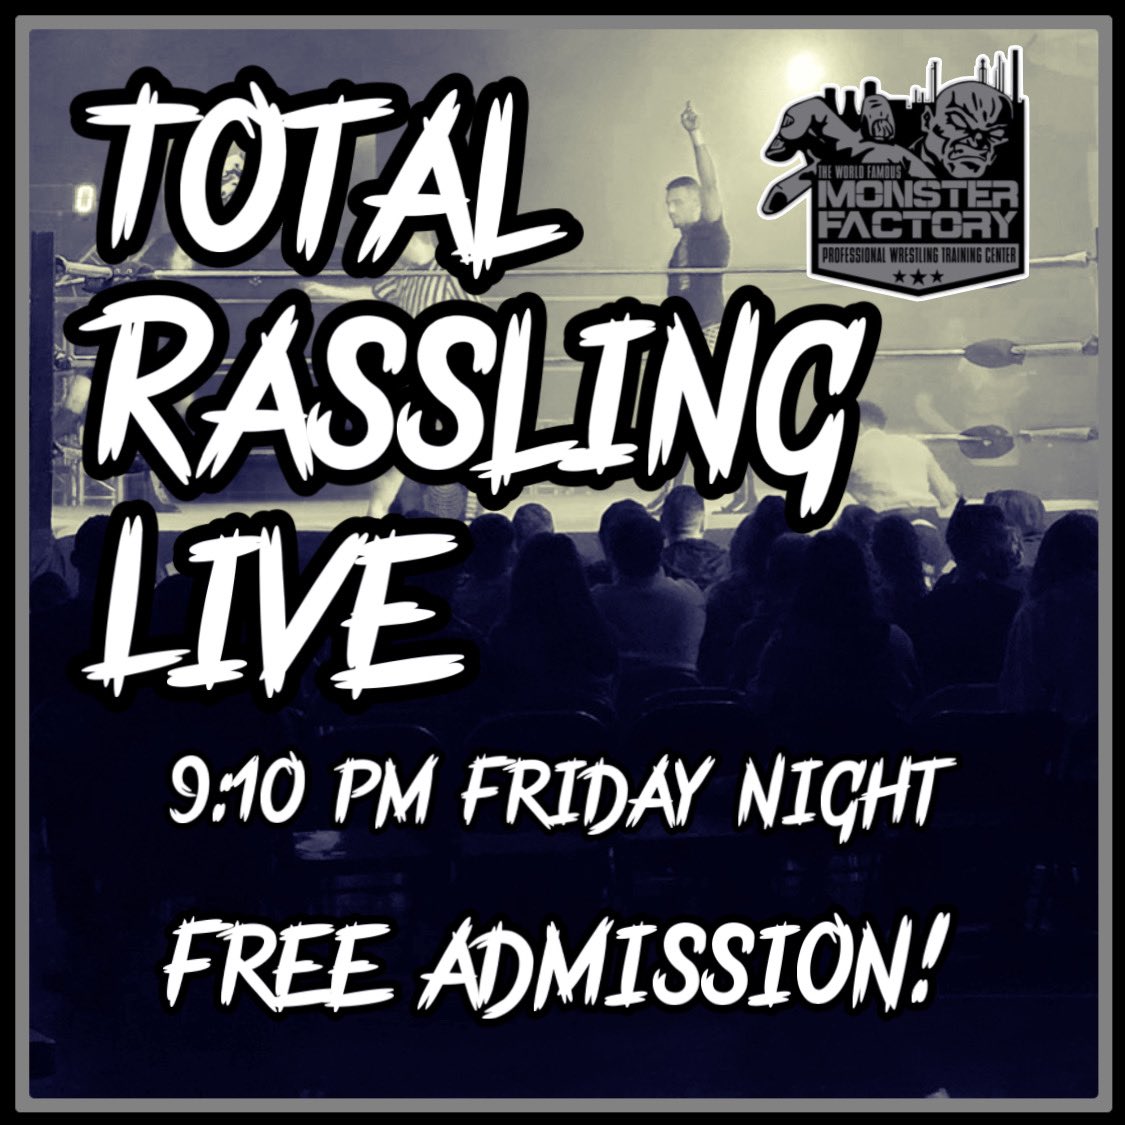 Tonight! 

T
R
L

Total Rassling Live! 

#trl #monsterfactory 

WATCH HERE: ➡️ youtube.com/@monsterfactor…